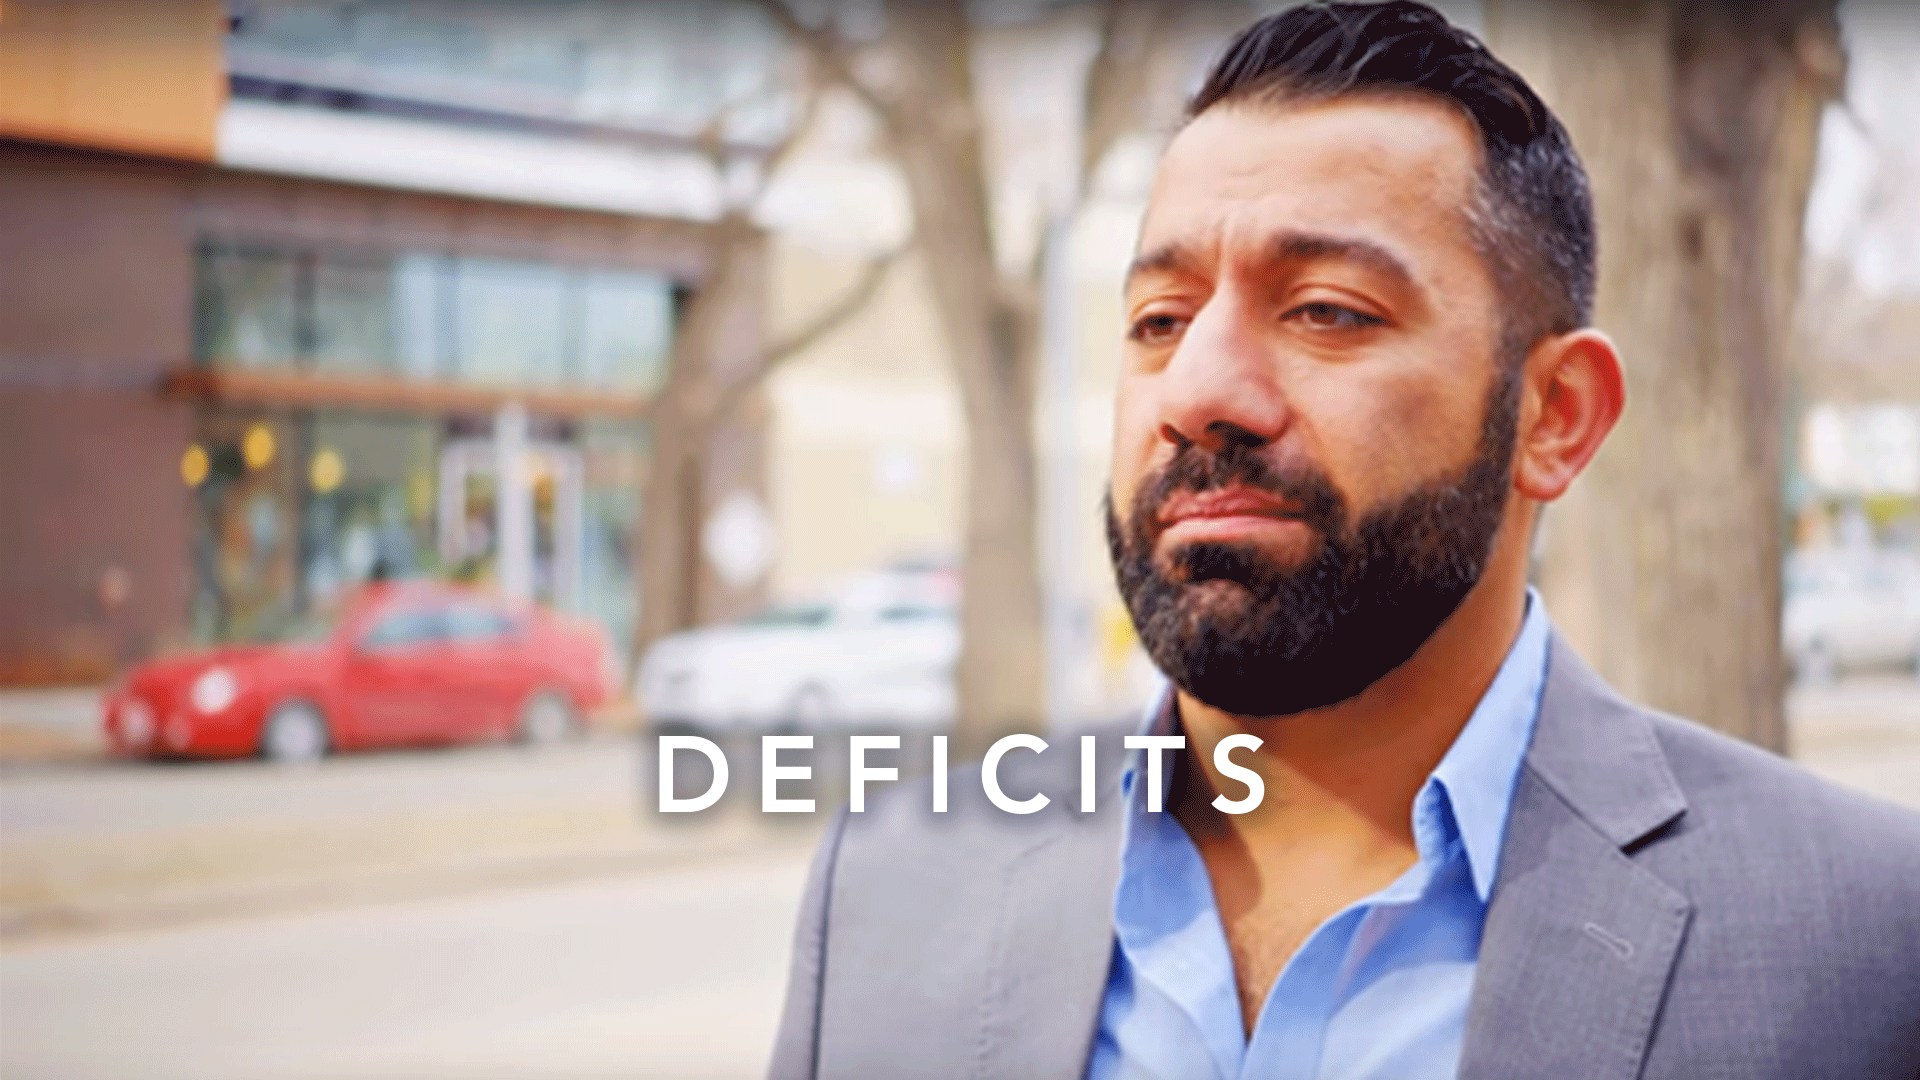 Deficit | Not as advertised.